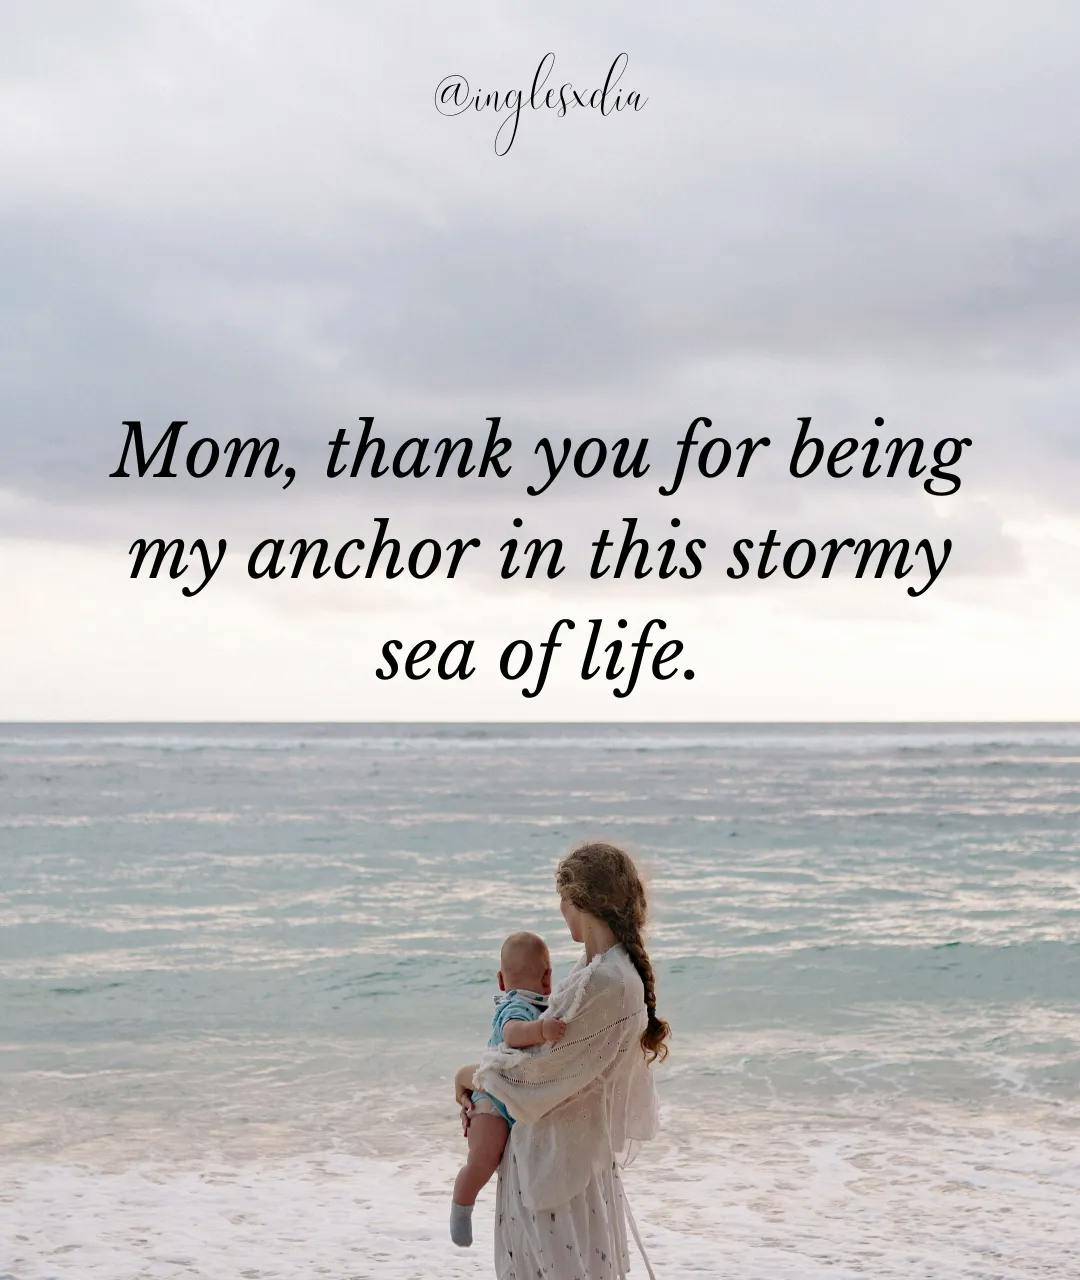 Frases motivadoras en inglés: Mom, thank you for being my anchor in this stormy sea of life.